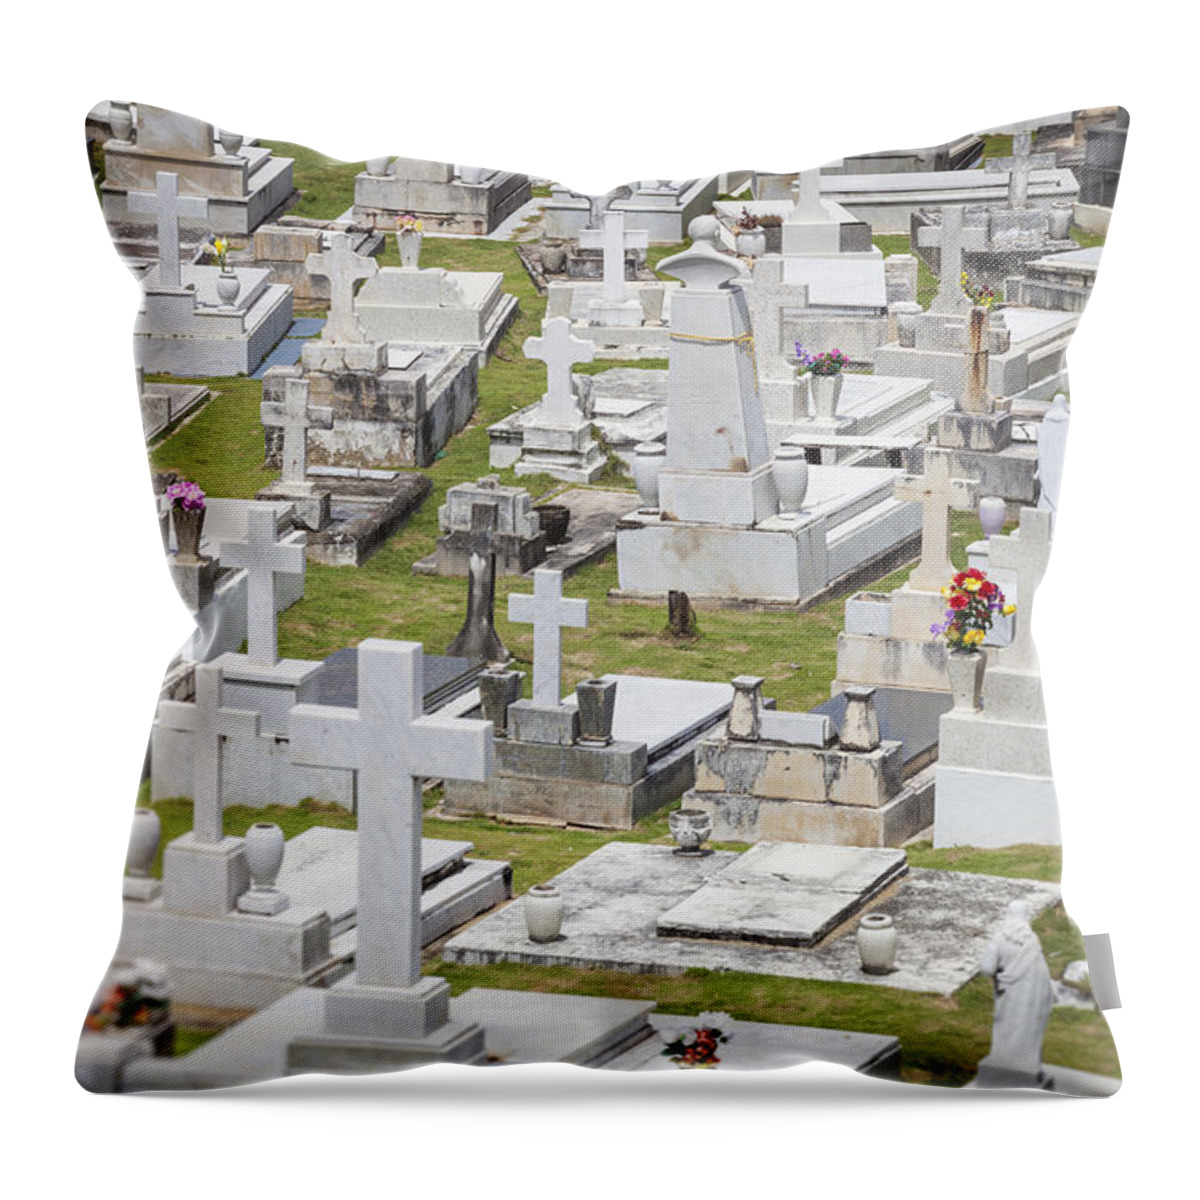 Del Morro Throw Pillow featuring the photograph A Cemetery In Old San Juan Puerto Rico by Bryan Mullennix